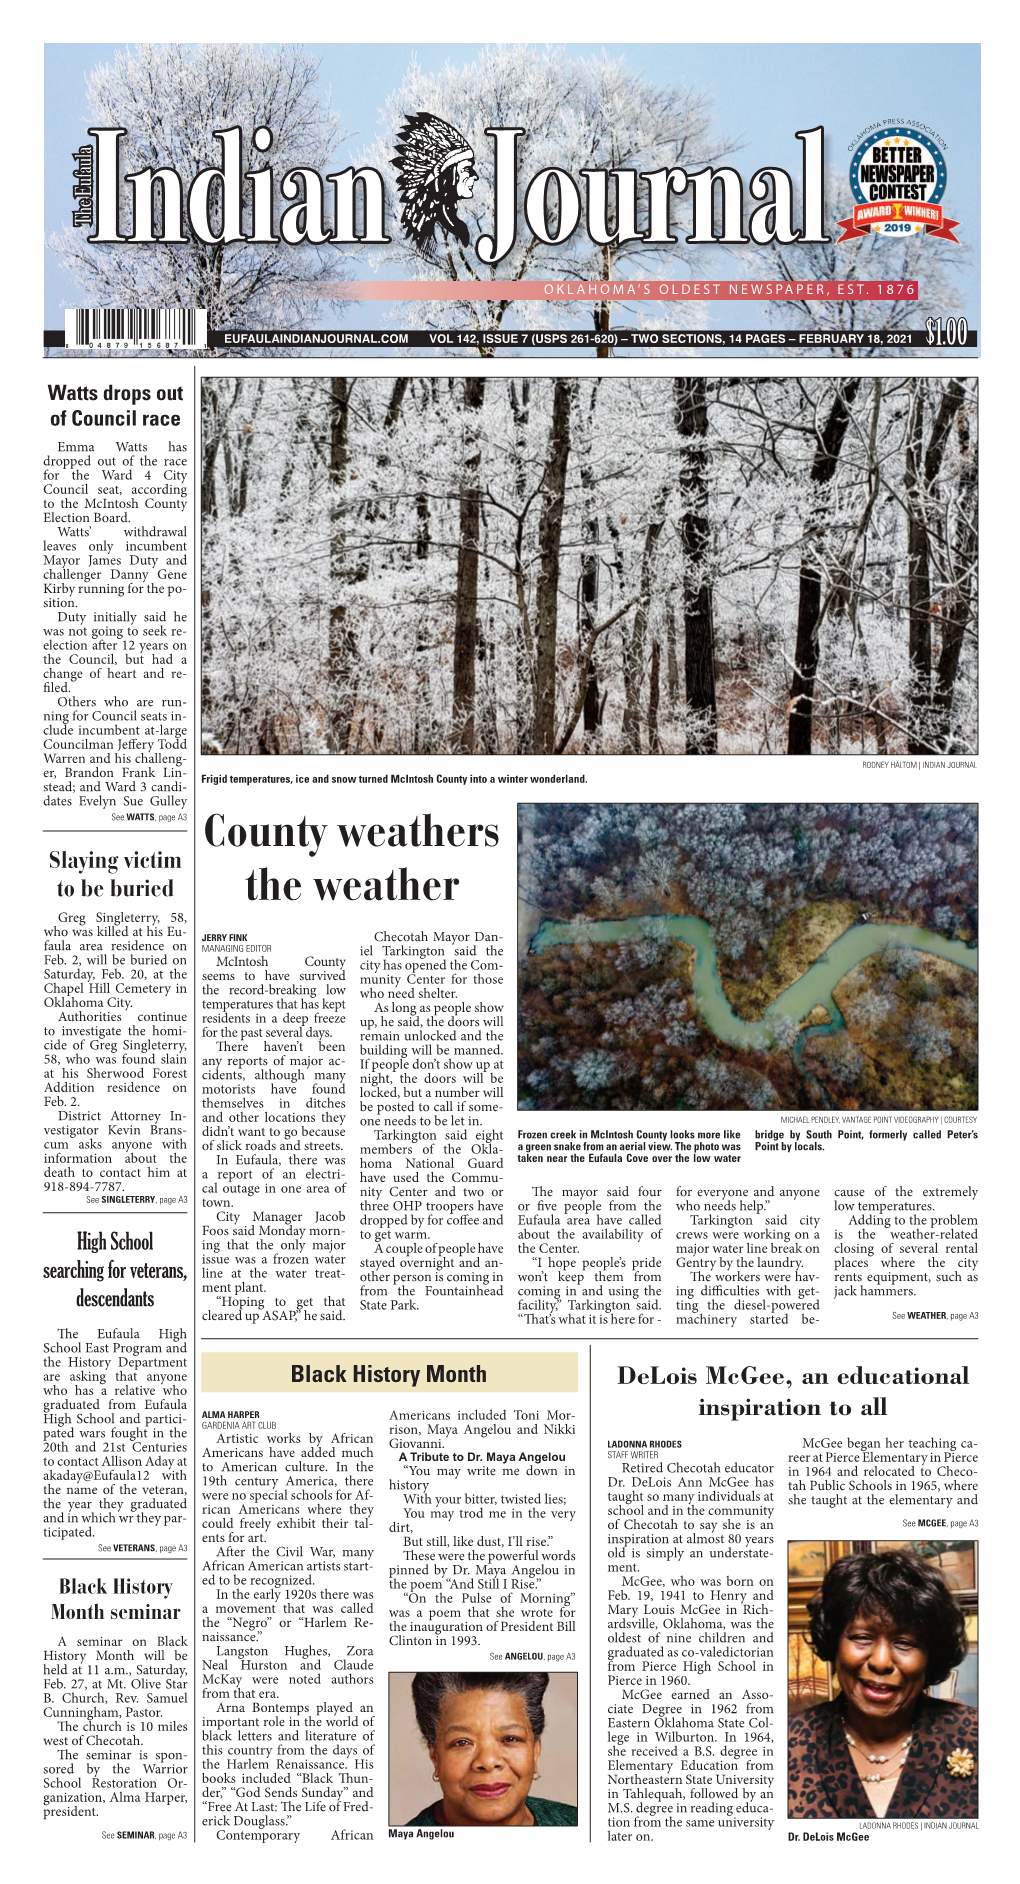 INDIAN JOURNAL Er, Brandon Frank Lin- Frigid Temperatures, Ice and Snow Turned Mcintosh County Into a Winter Wonderland